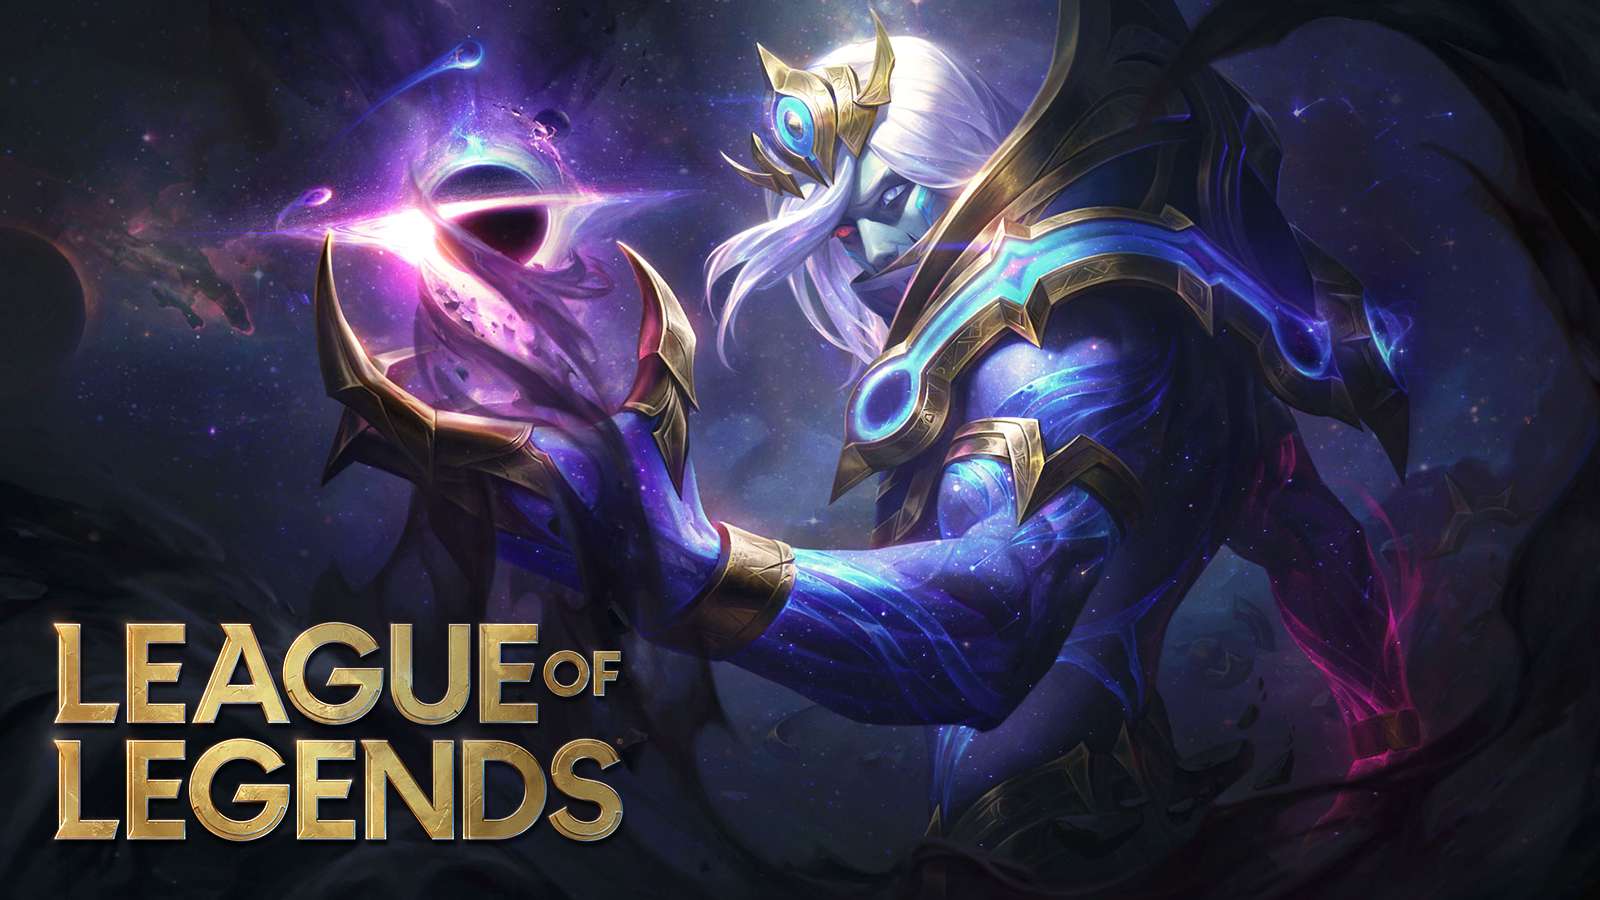 New League patch 10.24 cosmic Vladimir skin stands in front of LoL logo.